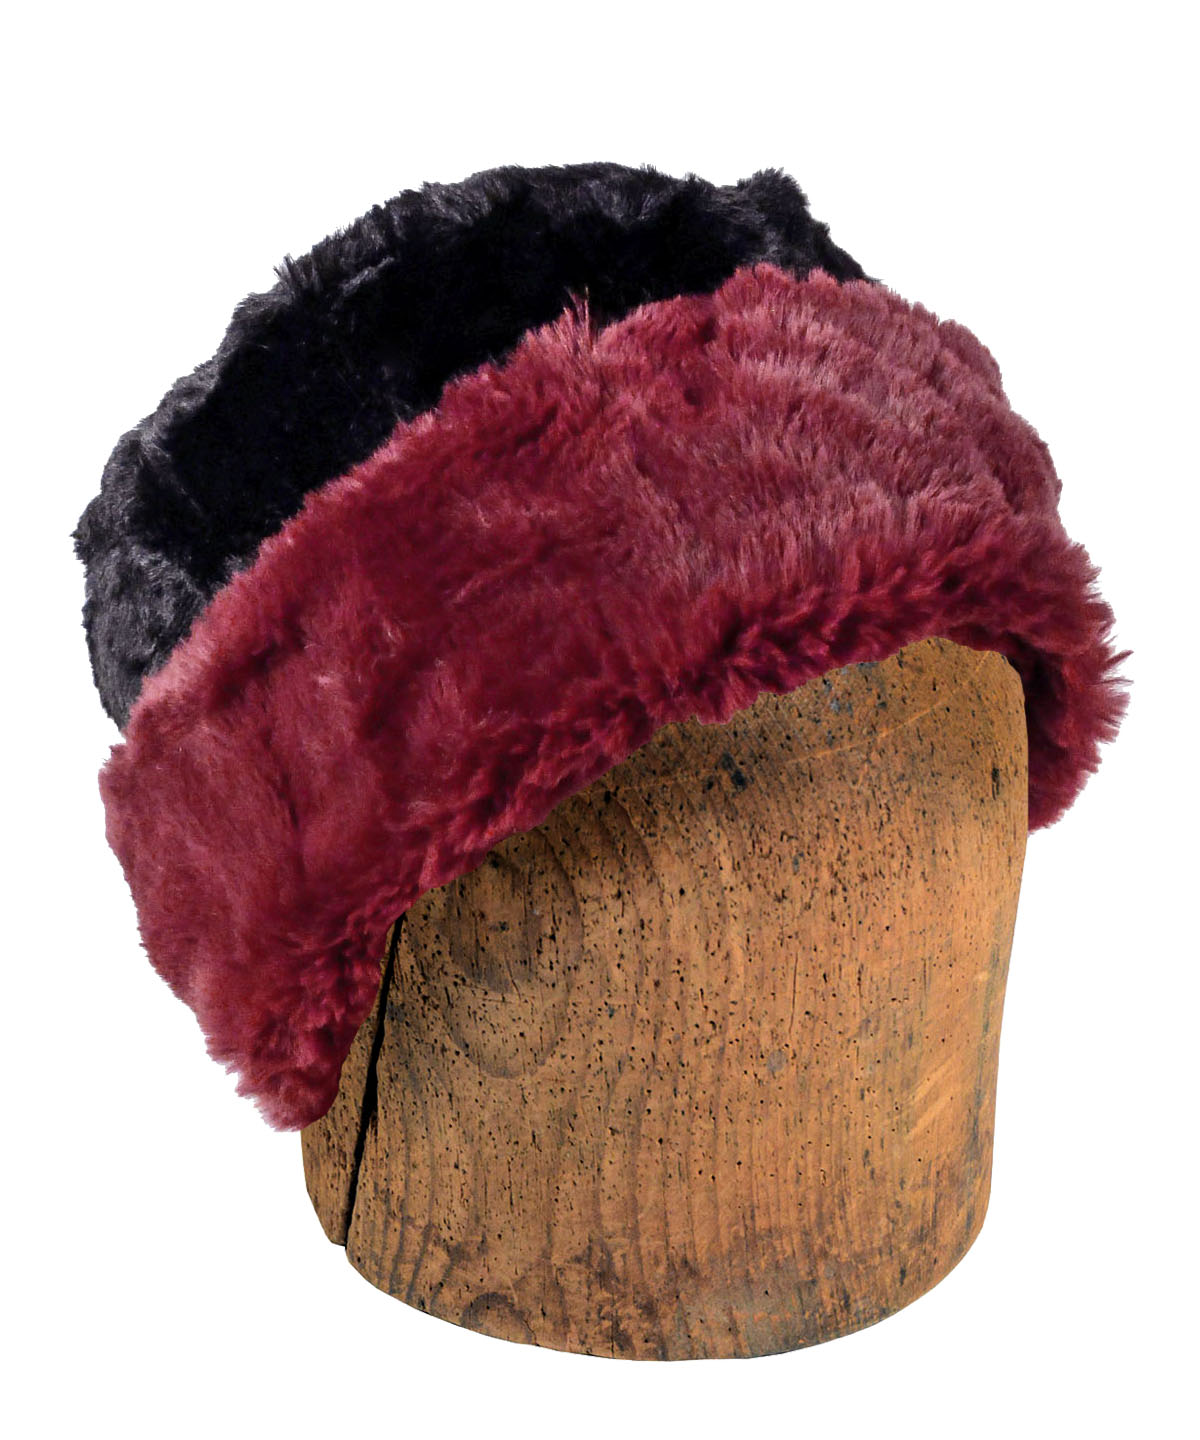 Men&#39;s 2-tone Cuffed Pillbox, Reversed | Luxury Faux Fur in Cranberry Creek and Cuddly Black Faux Fur | Handmade in Seattle WA by Pandemonium Millinery USA